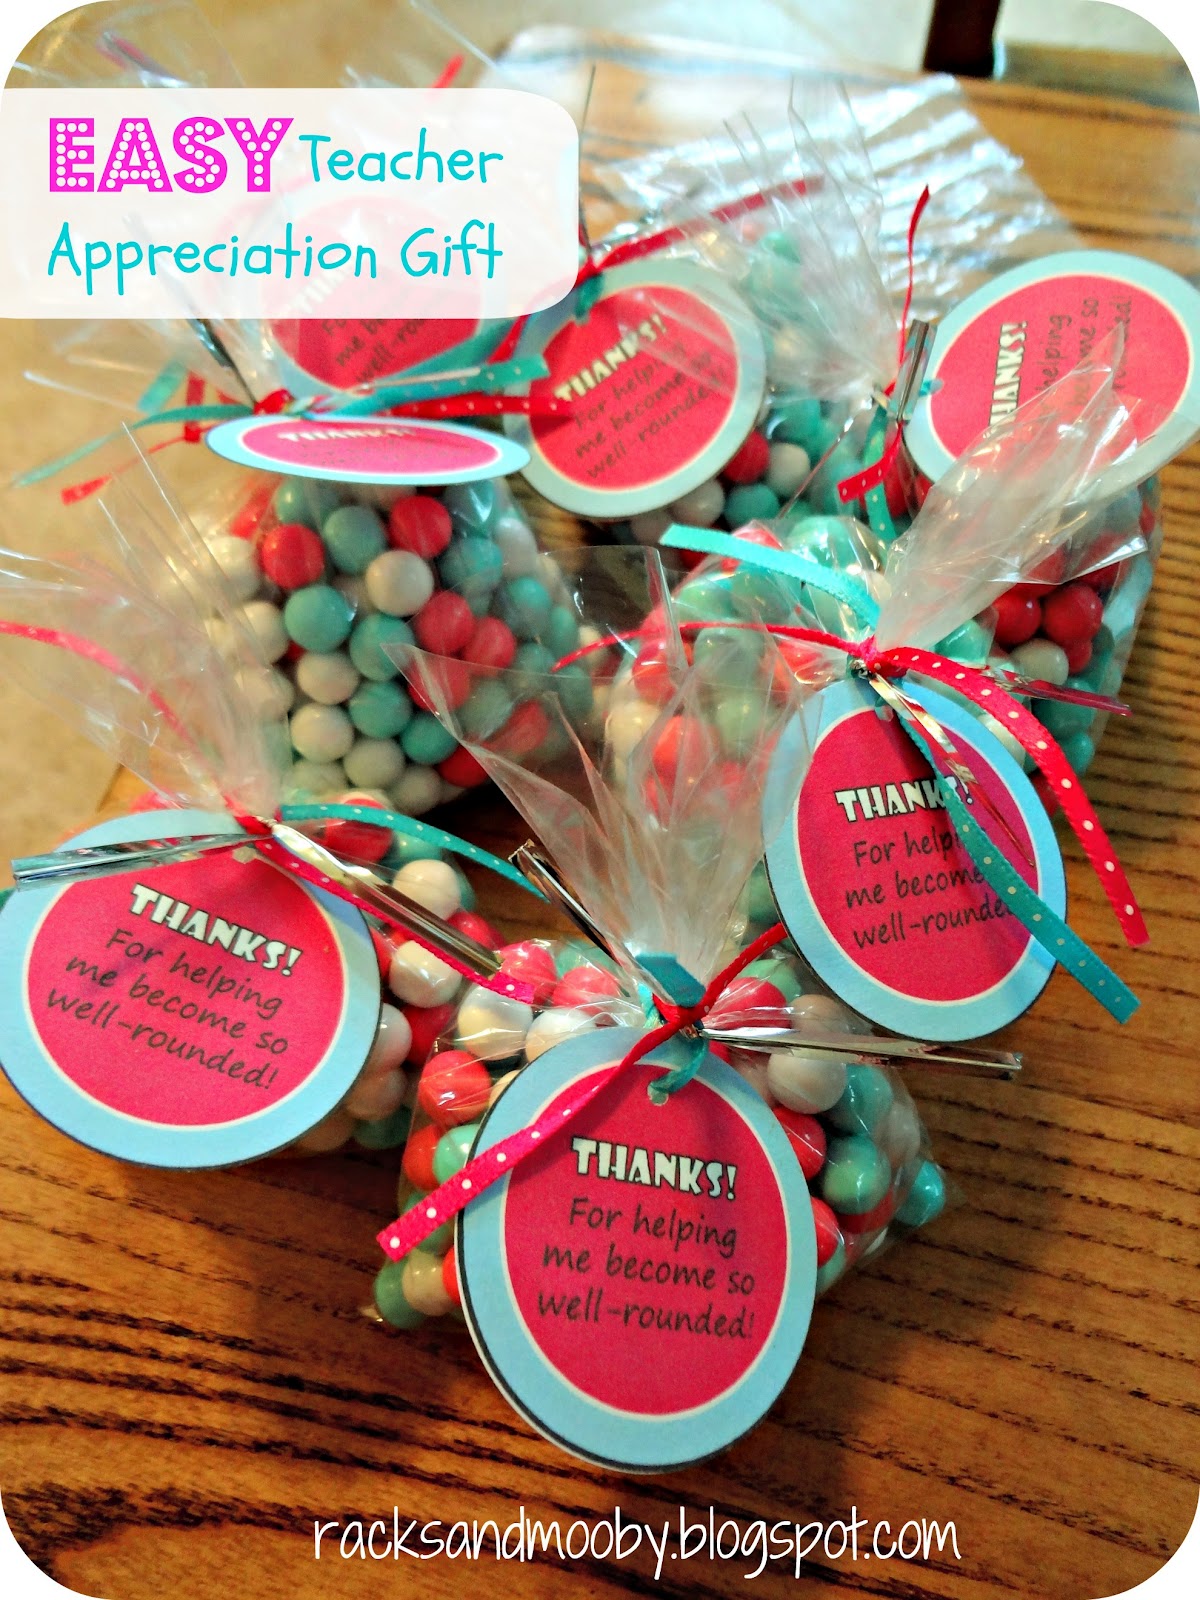 racks-and-mooby-inexpensive-and-easy-teacher-appreciation-gifts